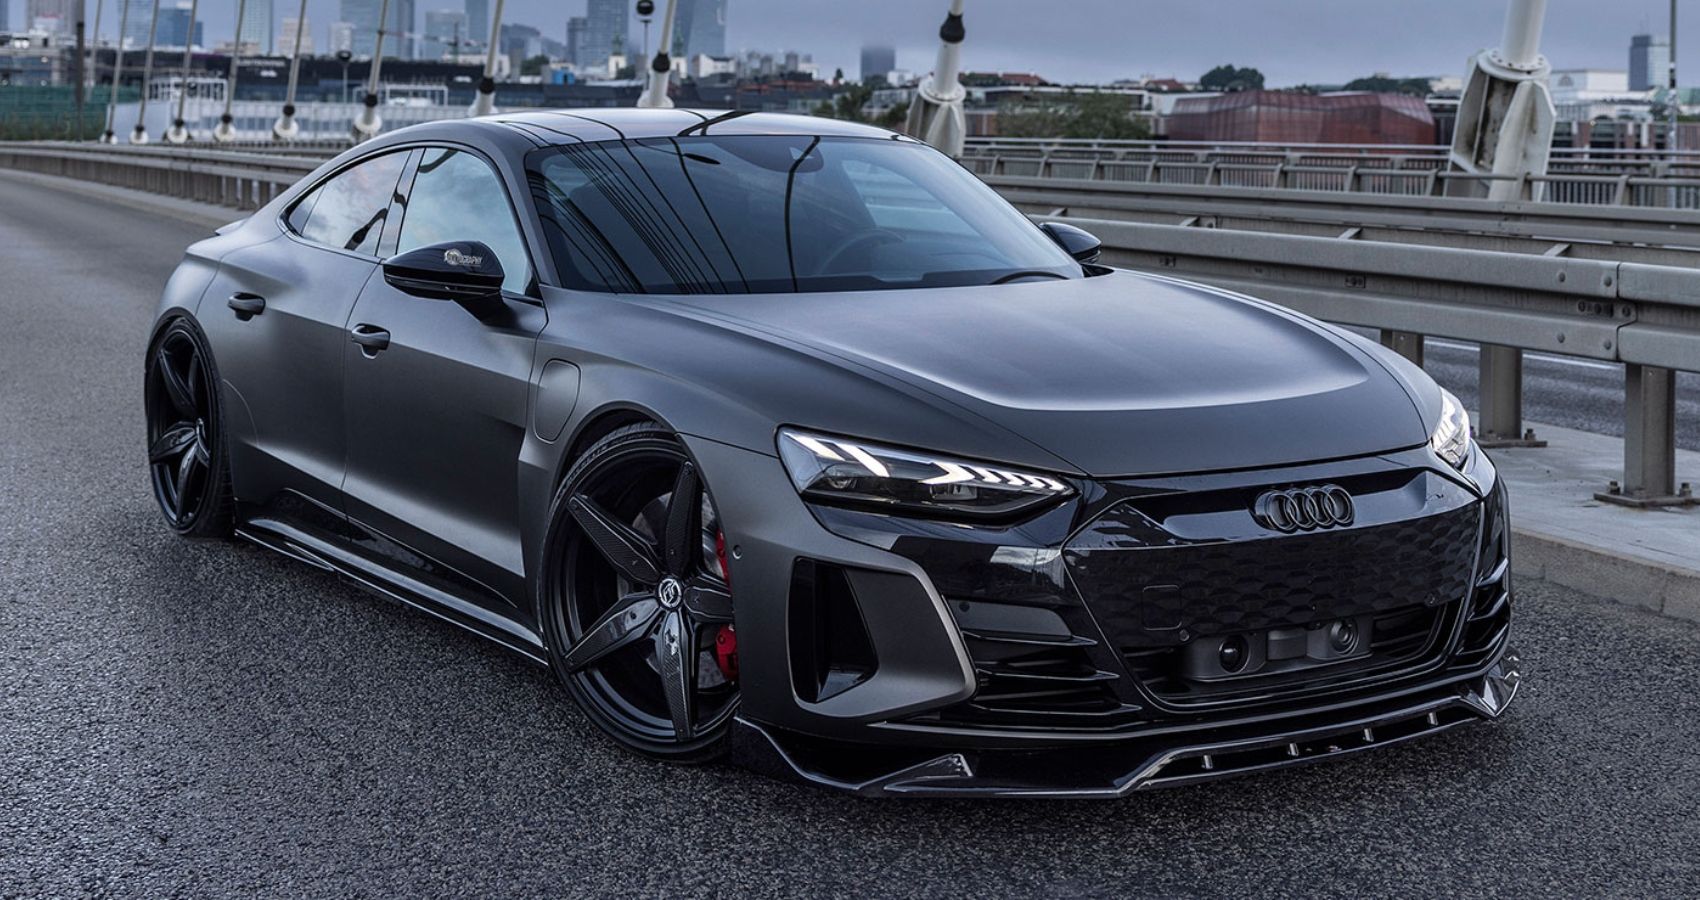 This Modified Audi RS E-Tron GT Looks Stealthy And Insane